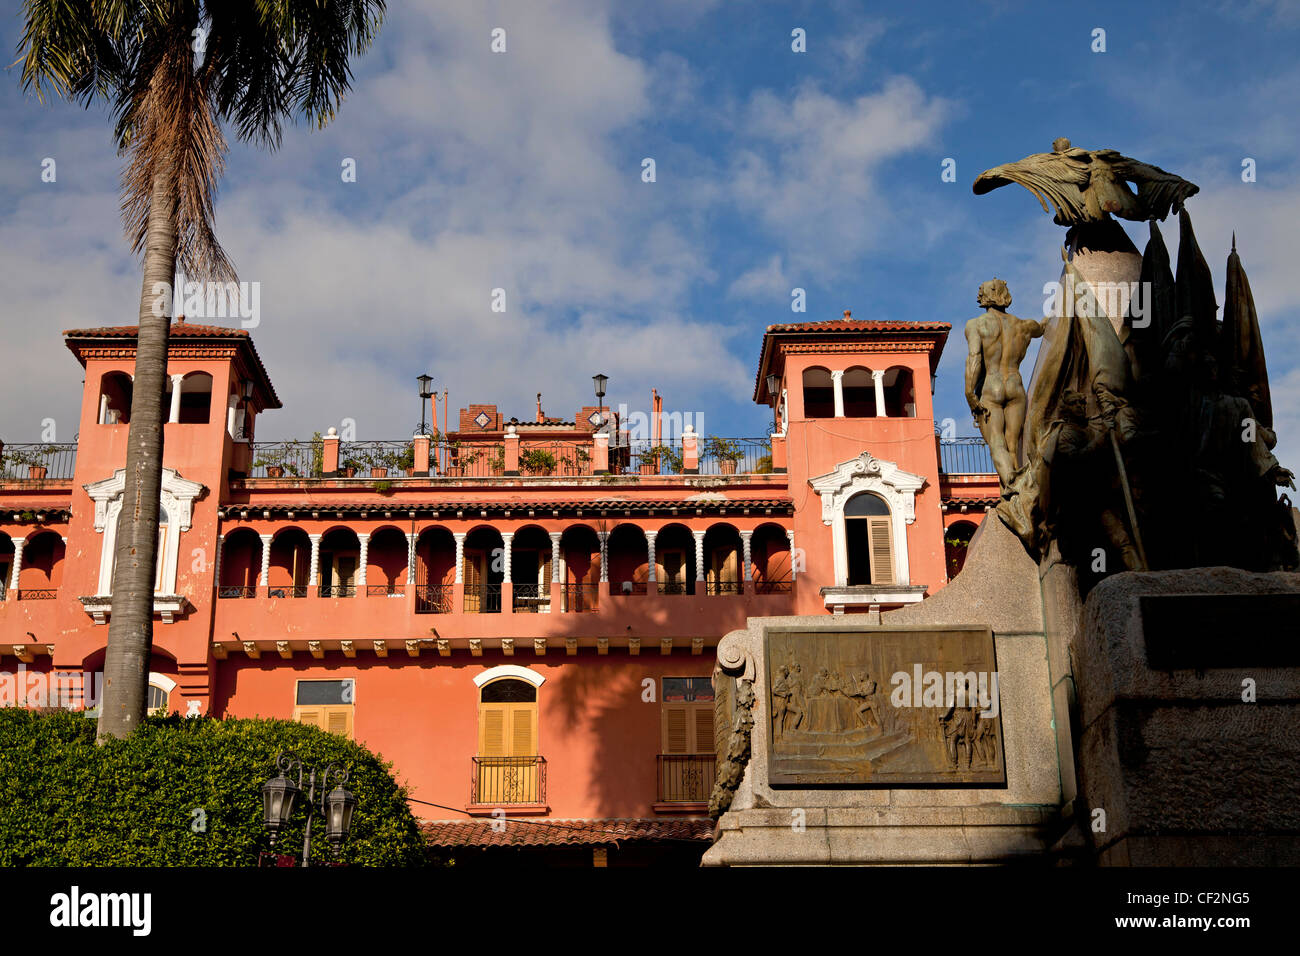 Monument to Simon Bolivar and Hotel Colombia in the Old City, Casco Viejo, Panama City, Panama, Central America Stock Photo